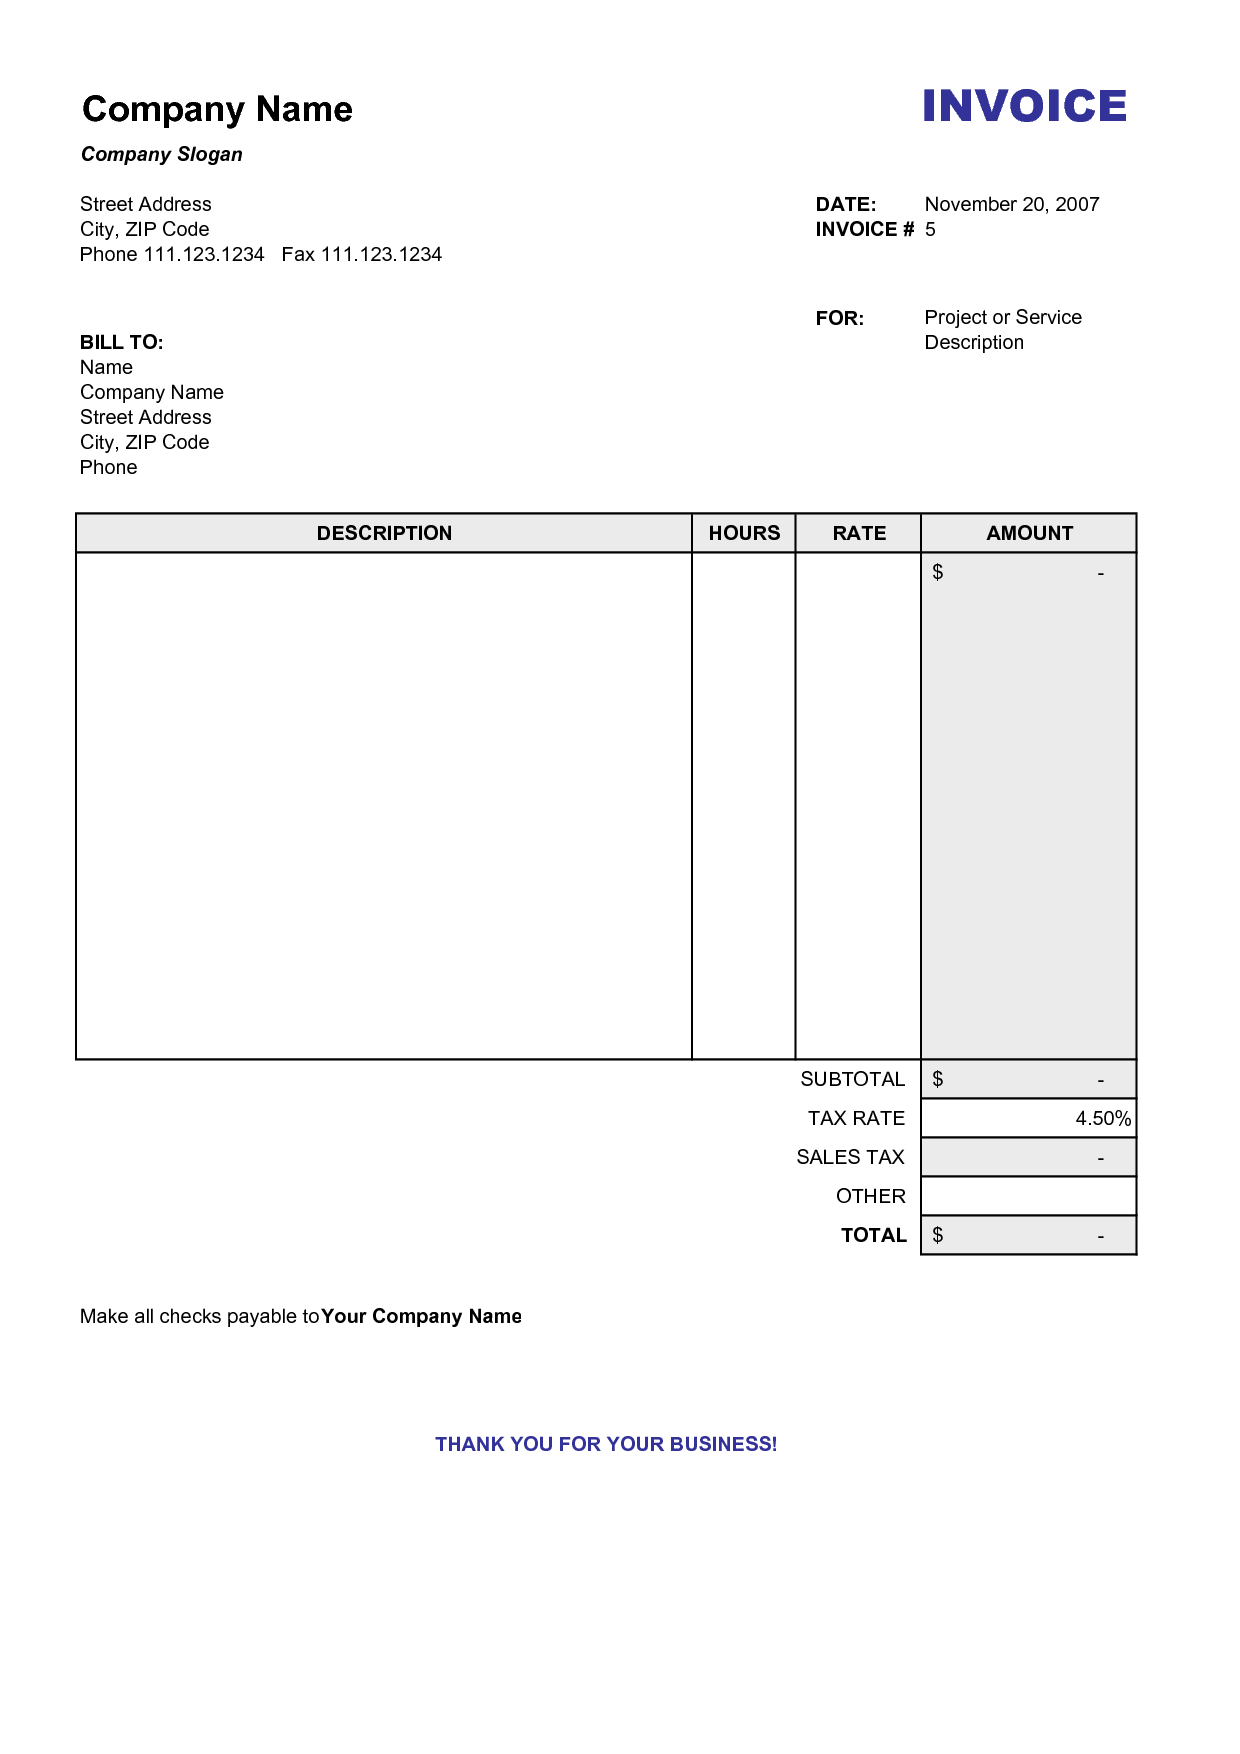 blank invoice excel download free invoice template IKoPys | free 